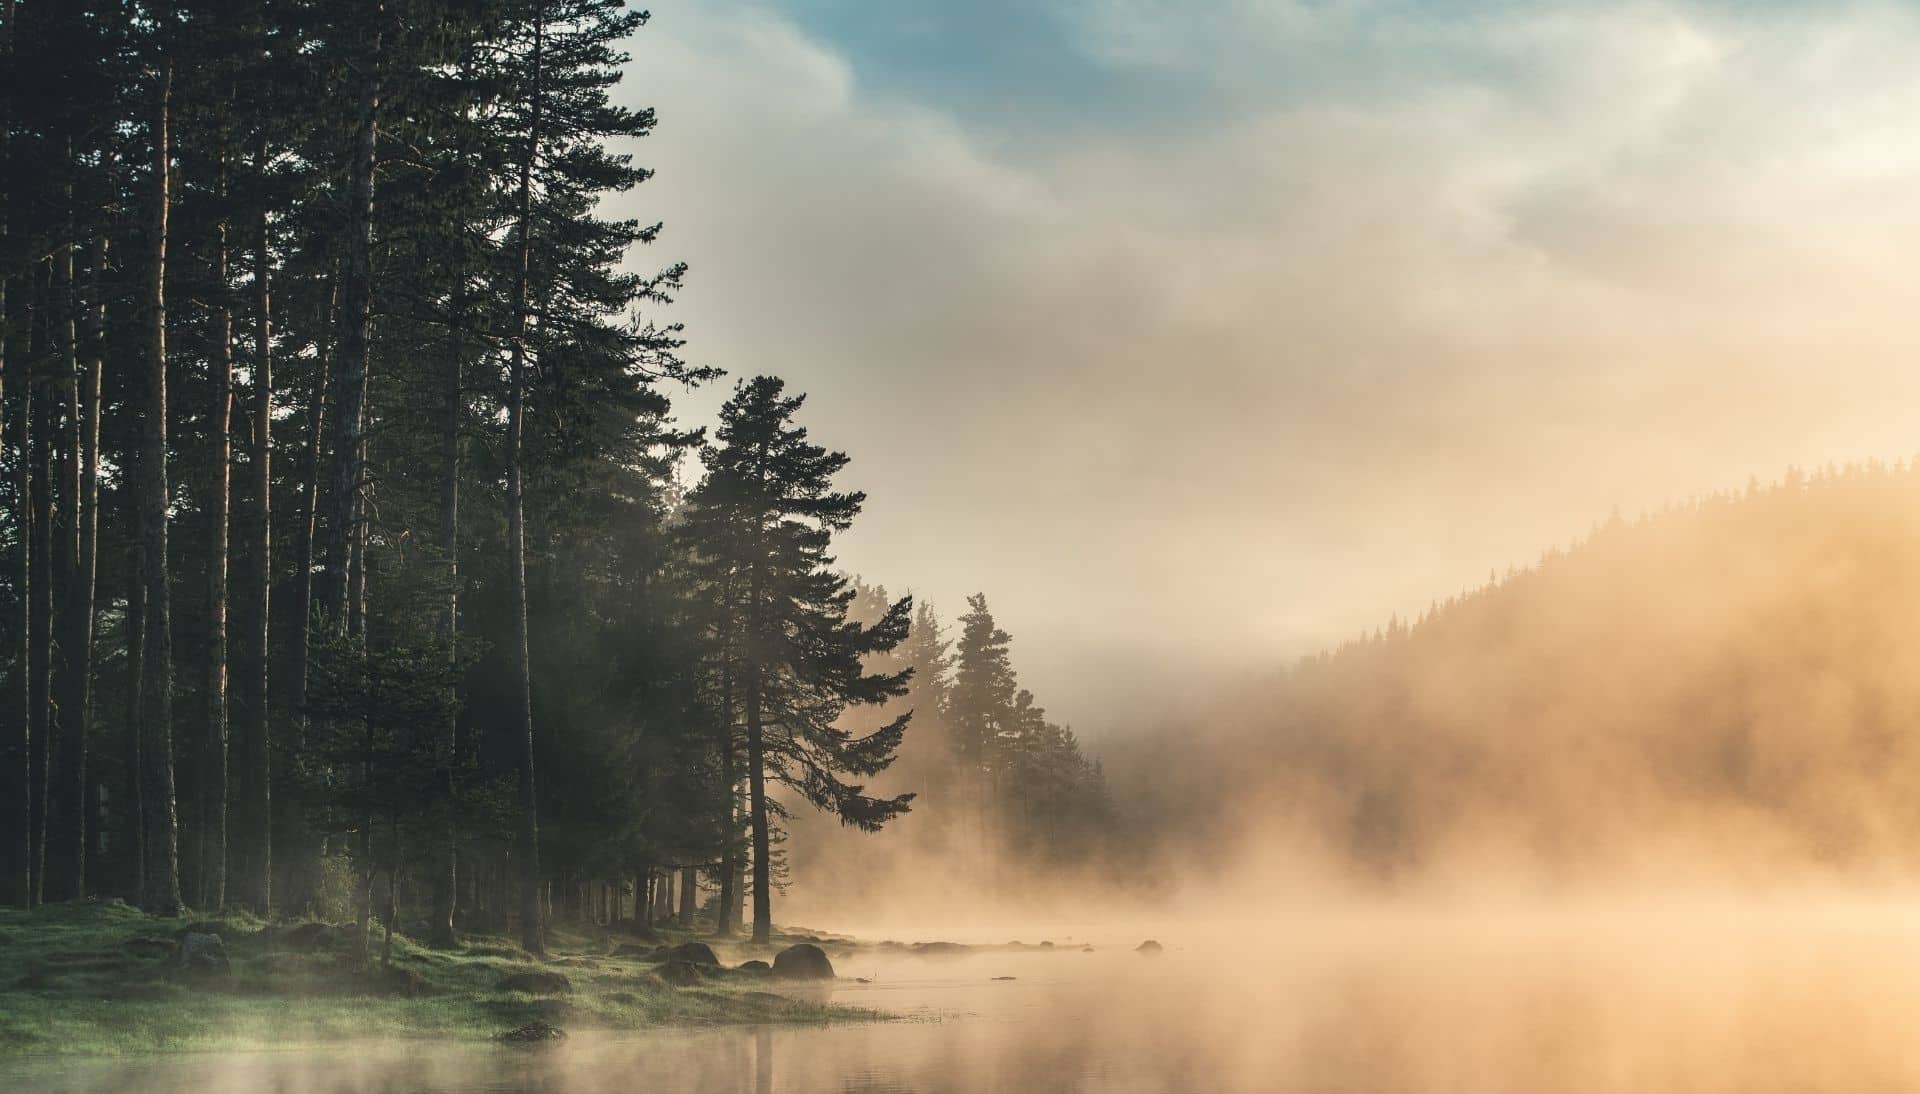 Mist over a serene lake with a forest nearby